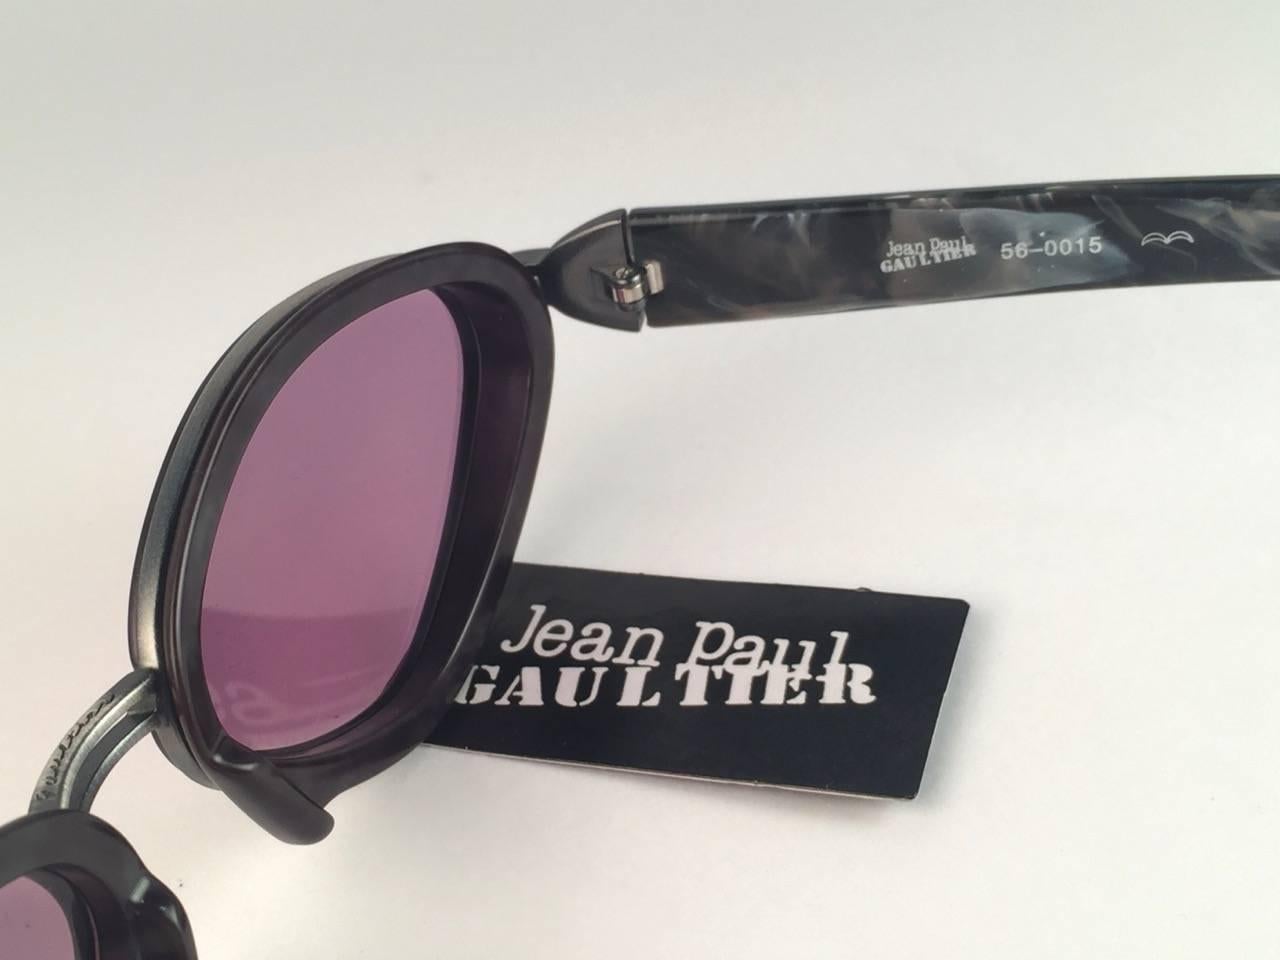 New Jean Paul Gaultier 56 0015 Marbled Grey Bullet Like Inserts 1990's Japan  For Sale 1